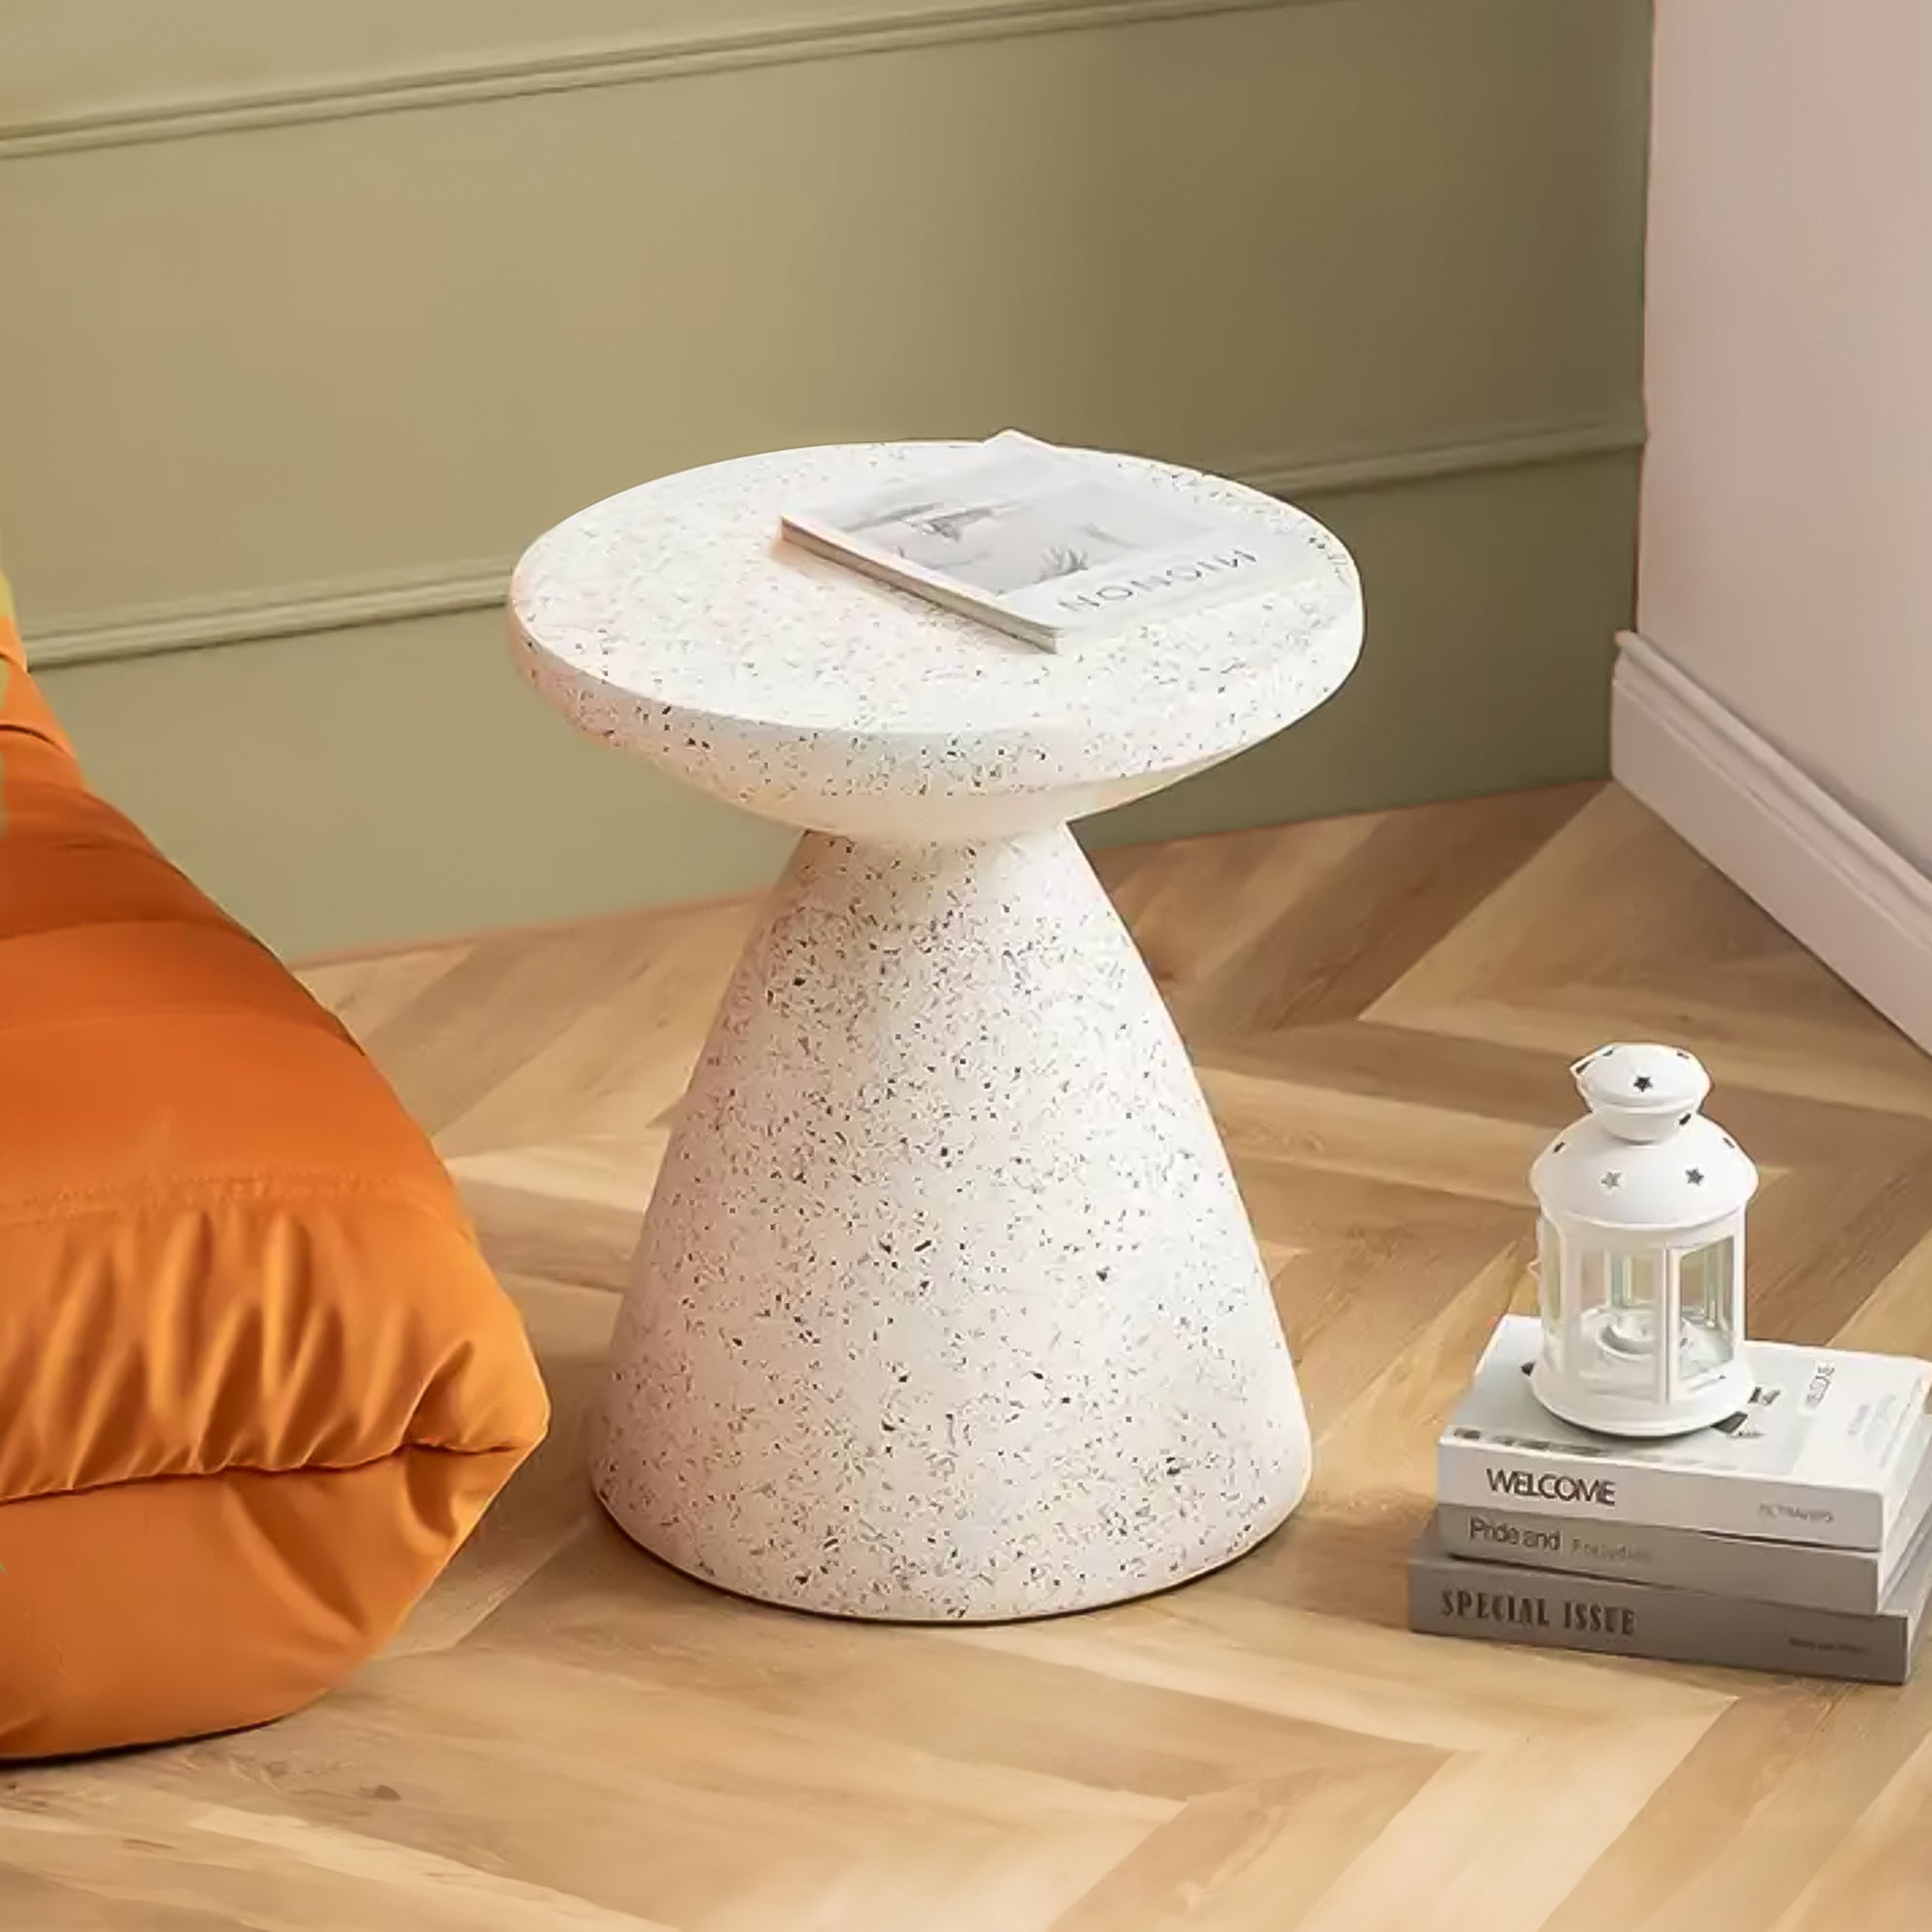 Agder Round Coffee Accent Side Table